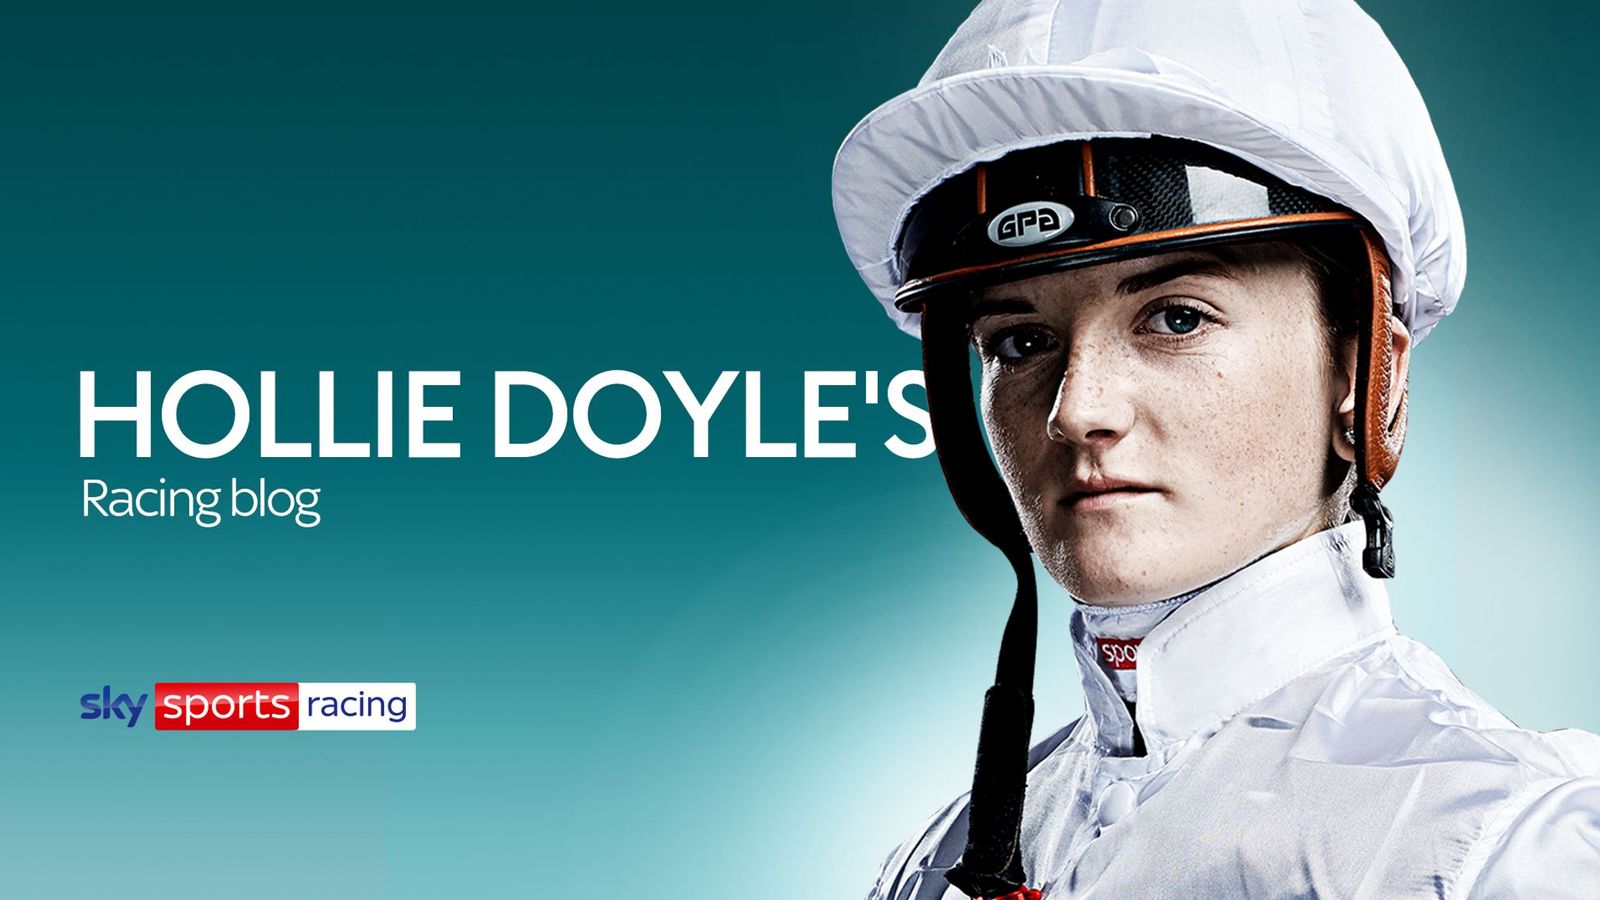 Hollie Doyle blog: Trio of rides for Sky Sports Racing ambassador at Royal Ascot including Tempus in Royal Hunt Cup